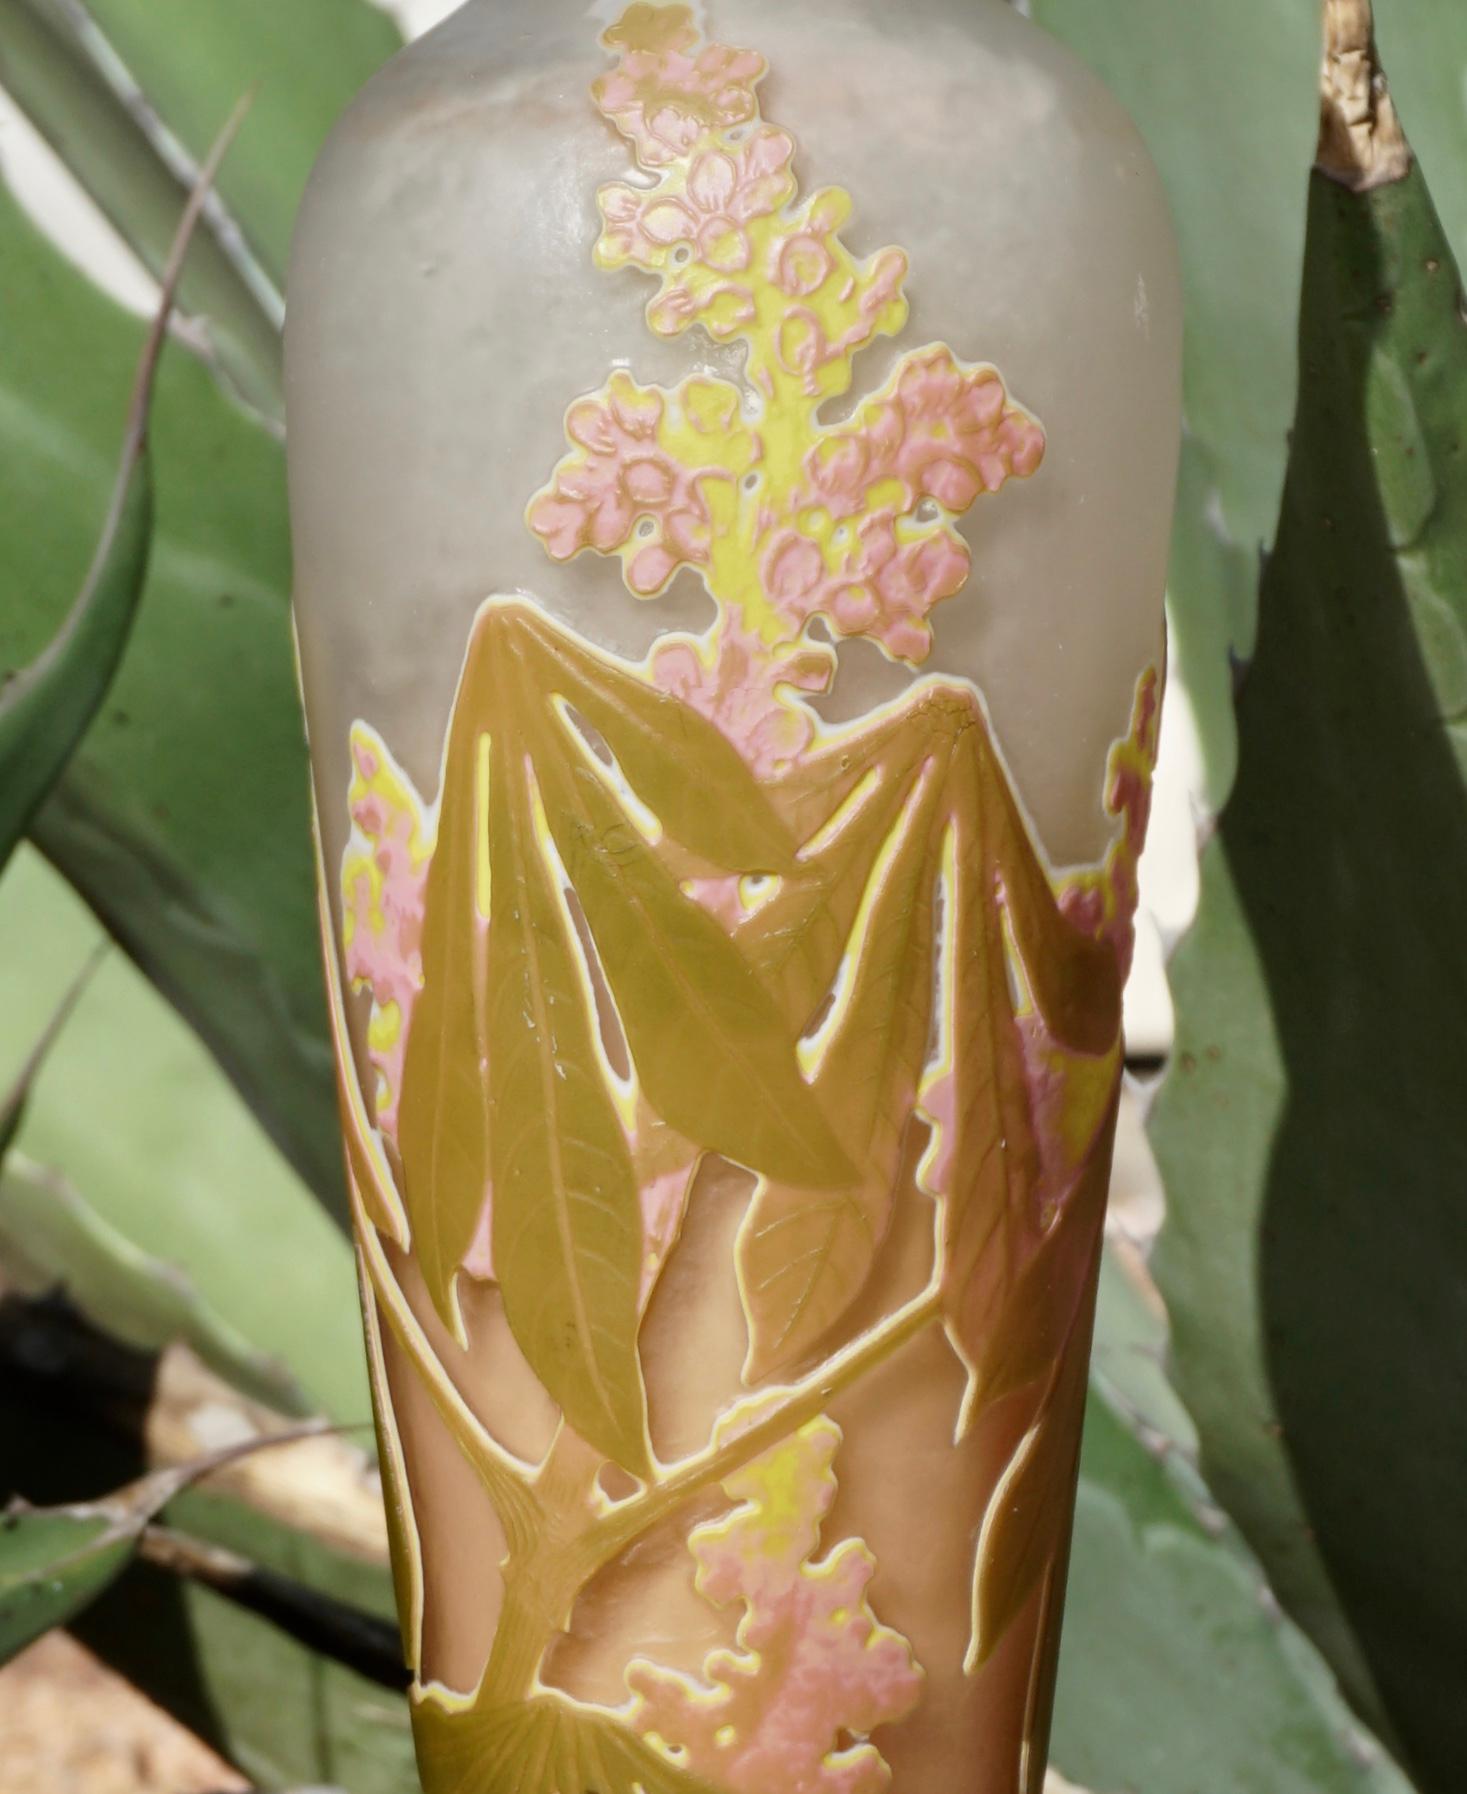 French Emile Galle Tall Cameo Art Nouveau Vase 1904 For Sale